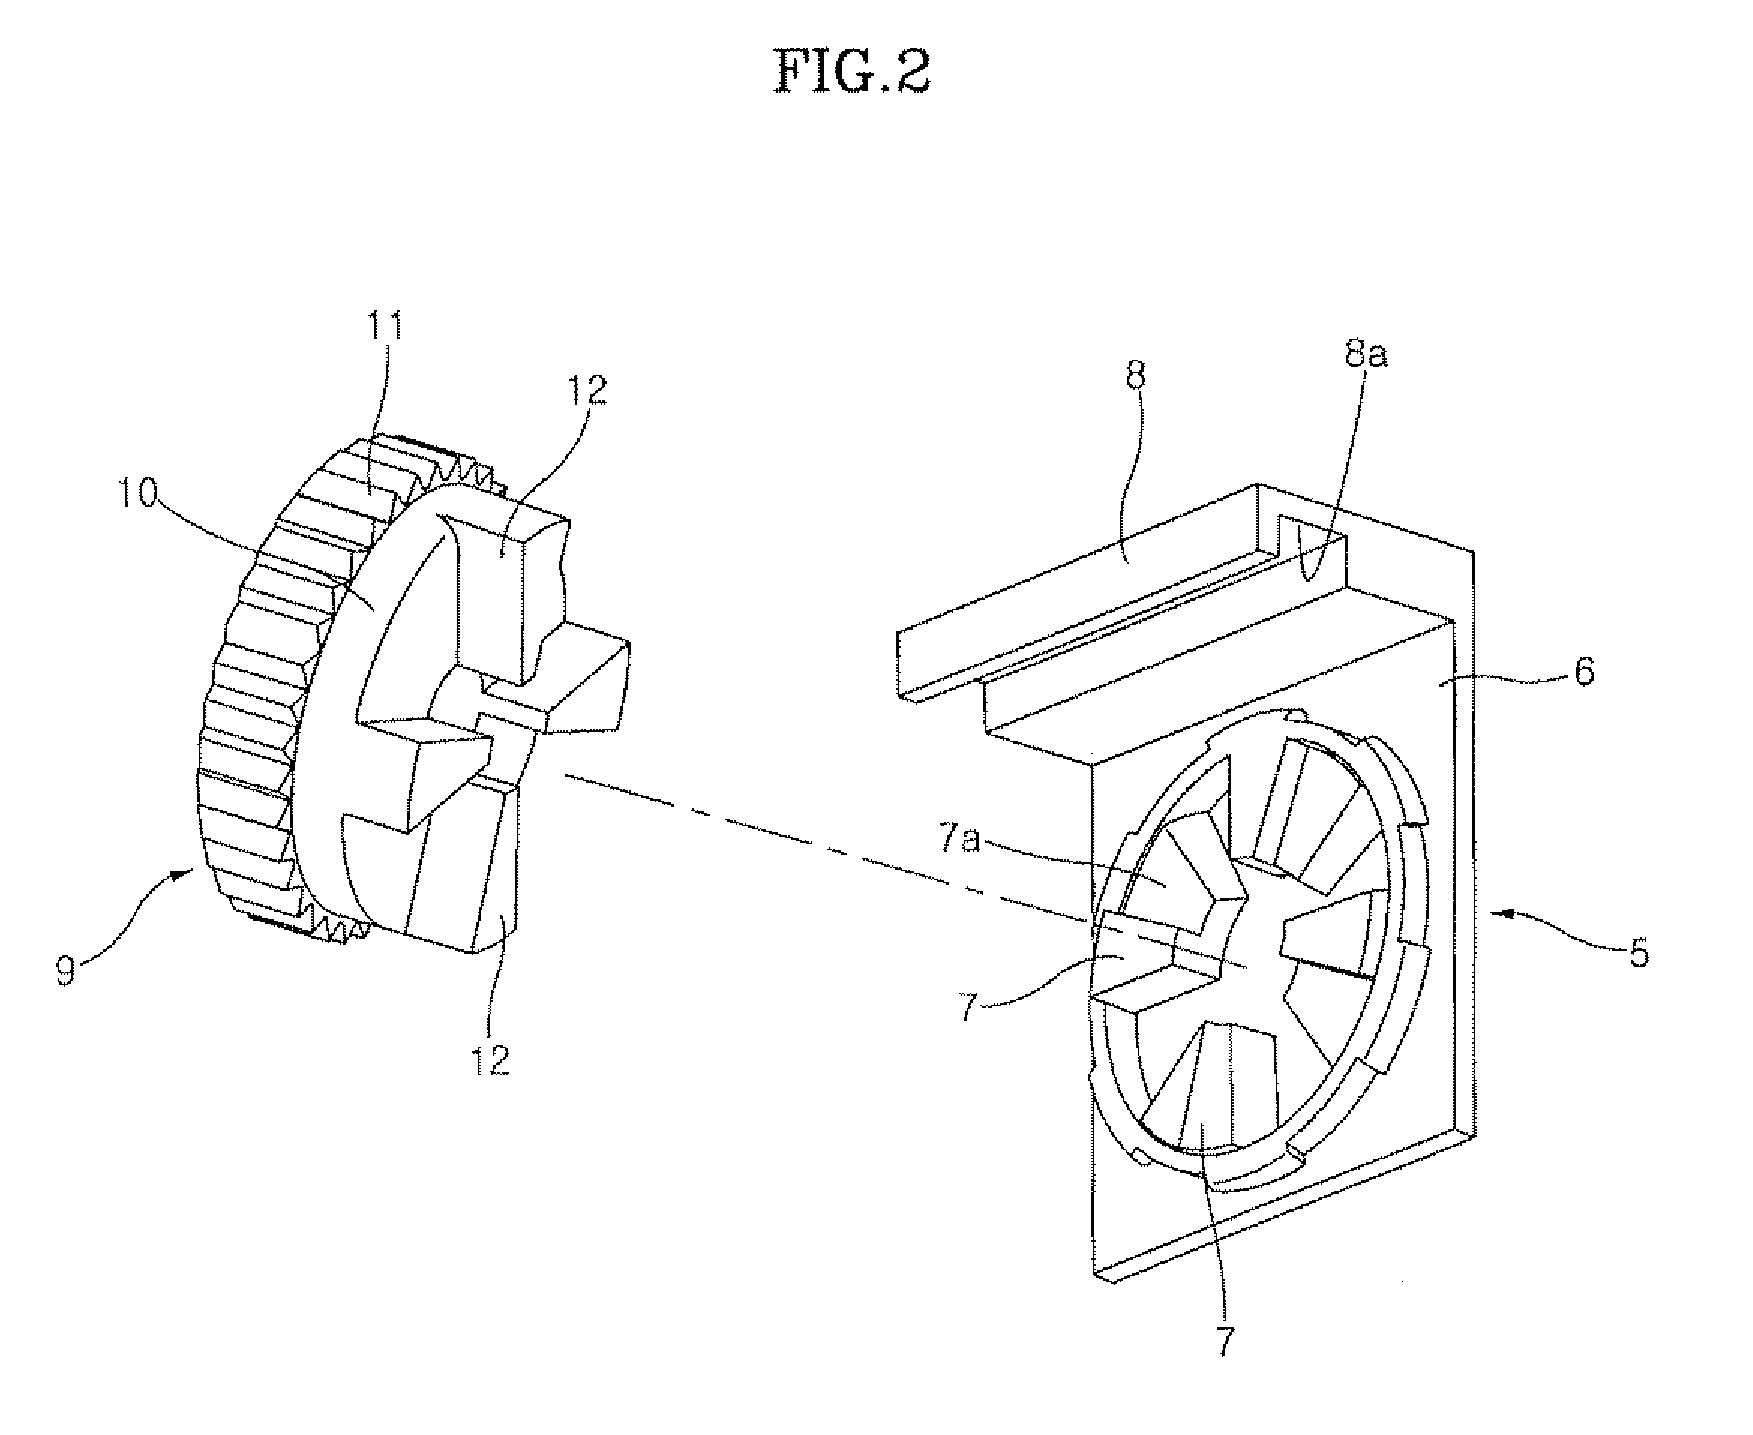 Push-pull type tilt lever assembly for steering system of vehicle